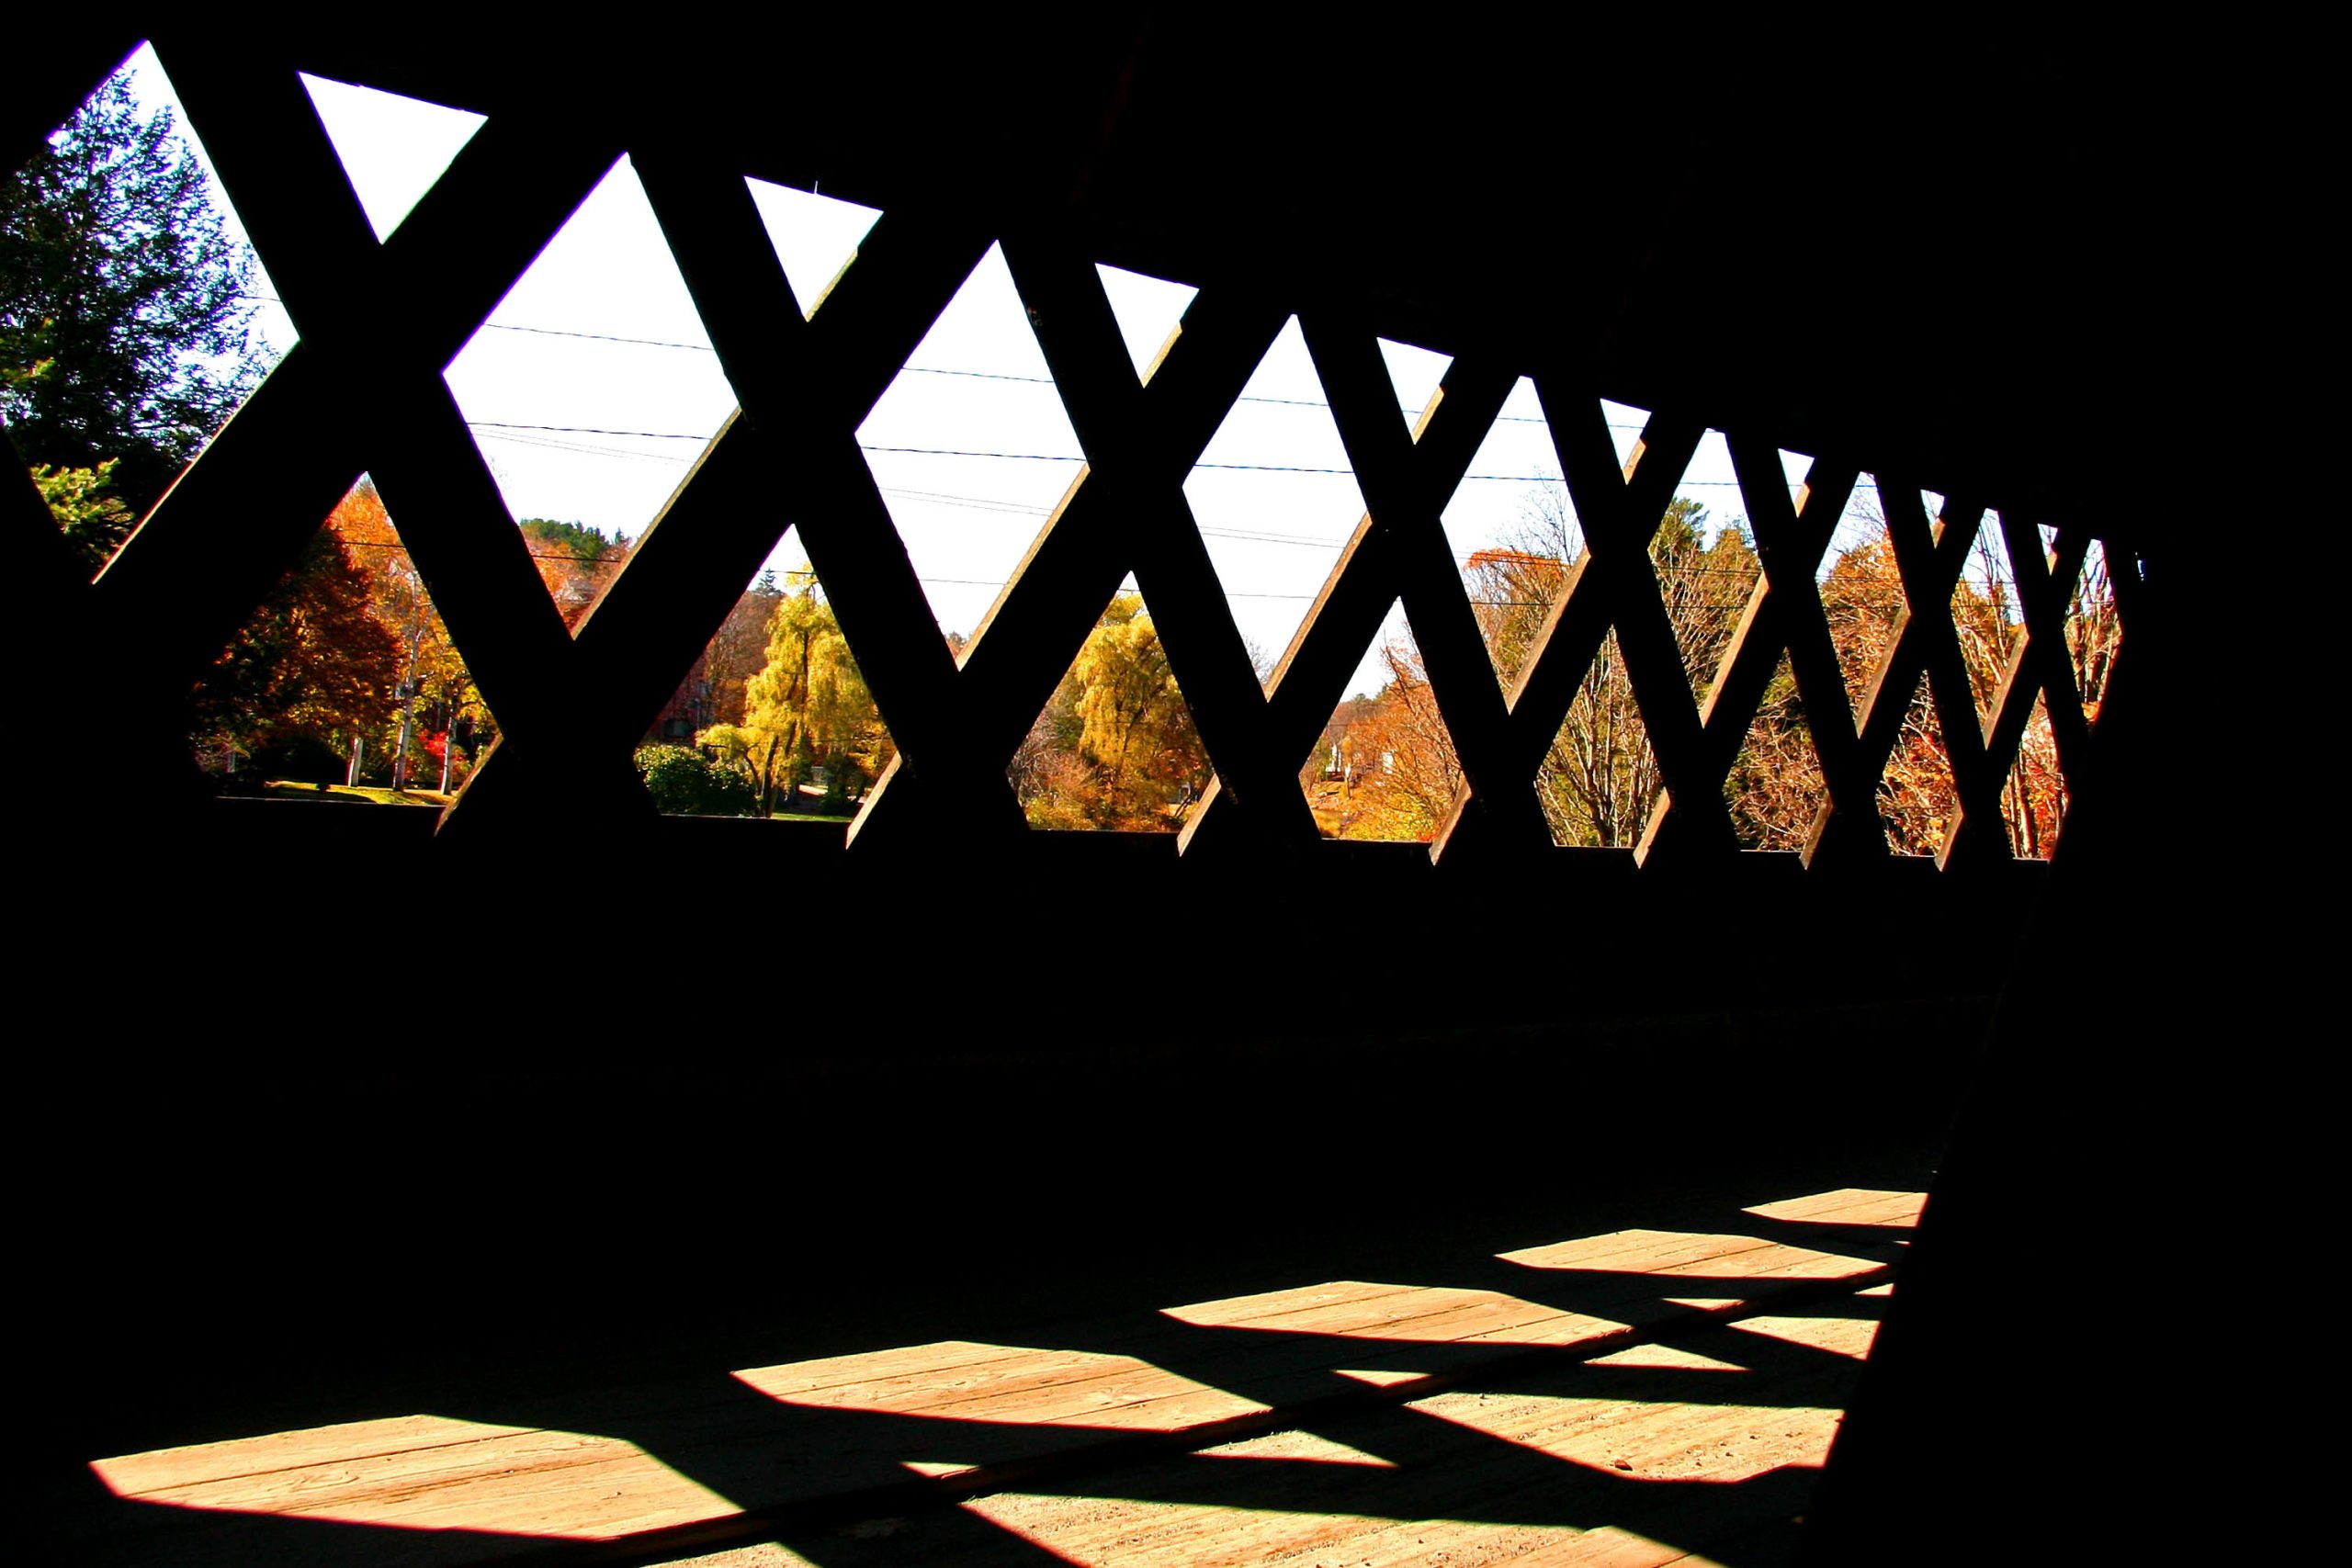 Inside The Woodstock Bridge In Vt (user submitted)